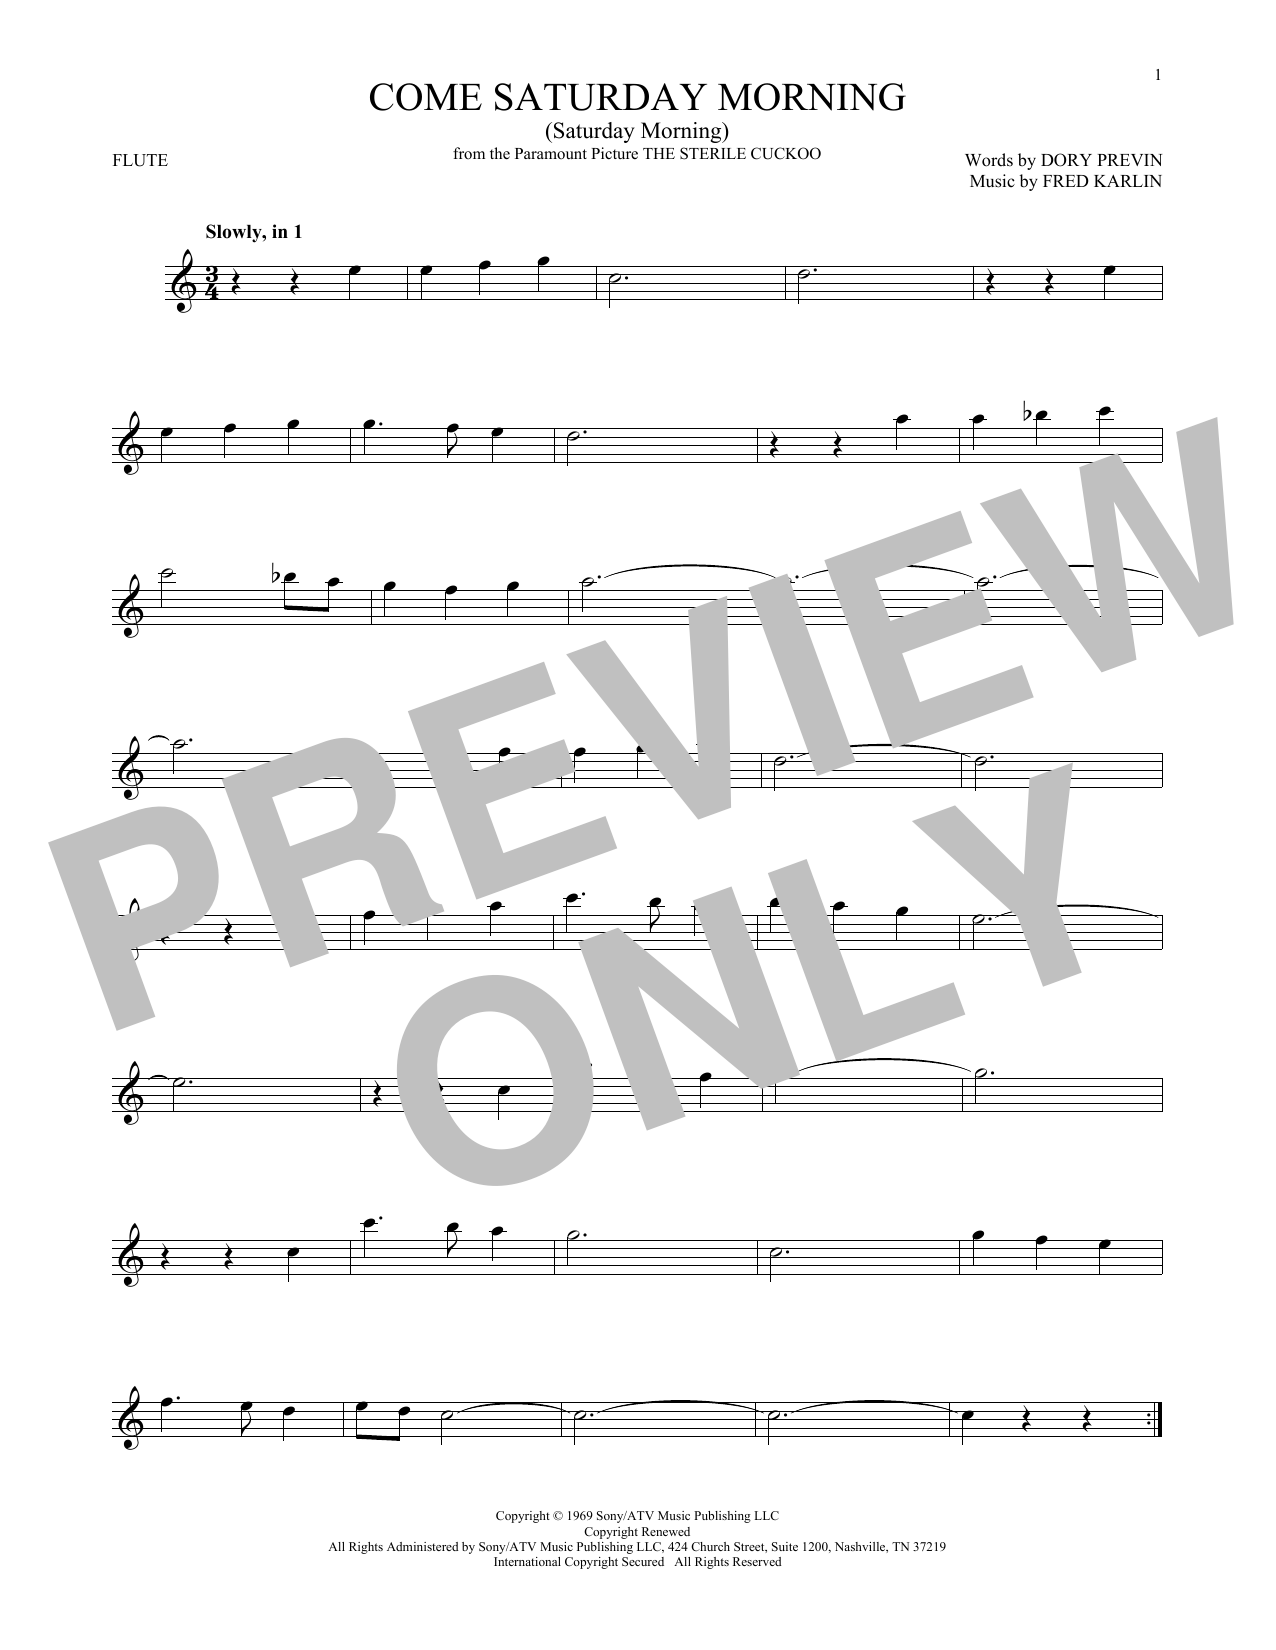 Download Dory Previn Come Saturday Morning (Saturday Morning Sheet Music